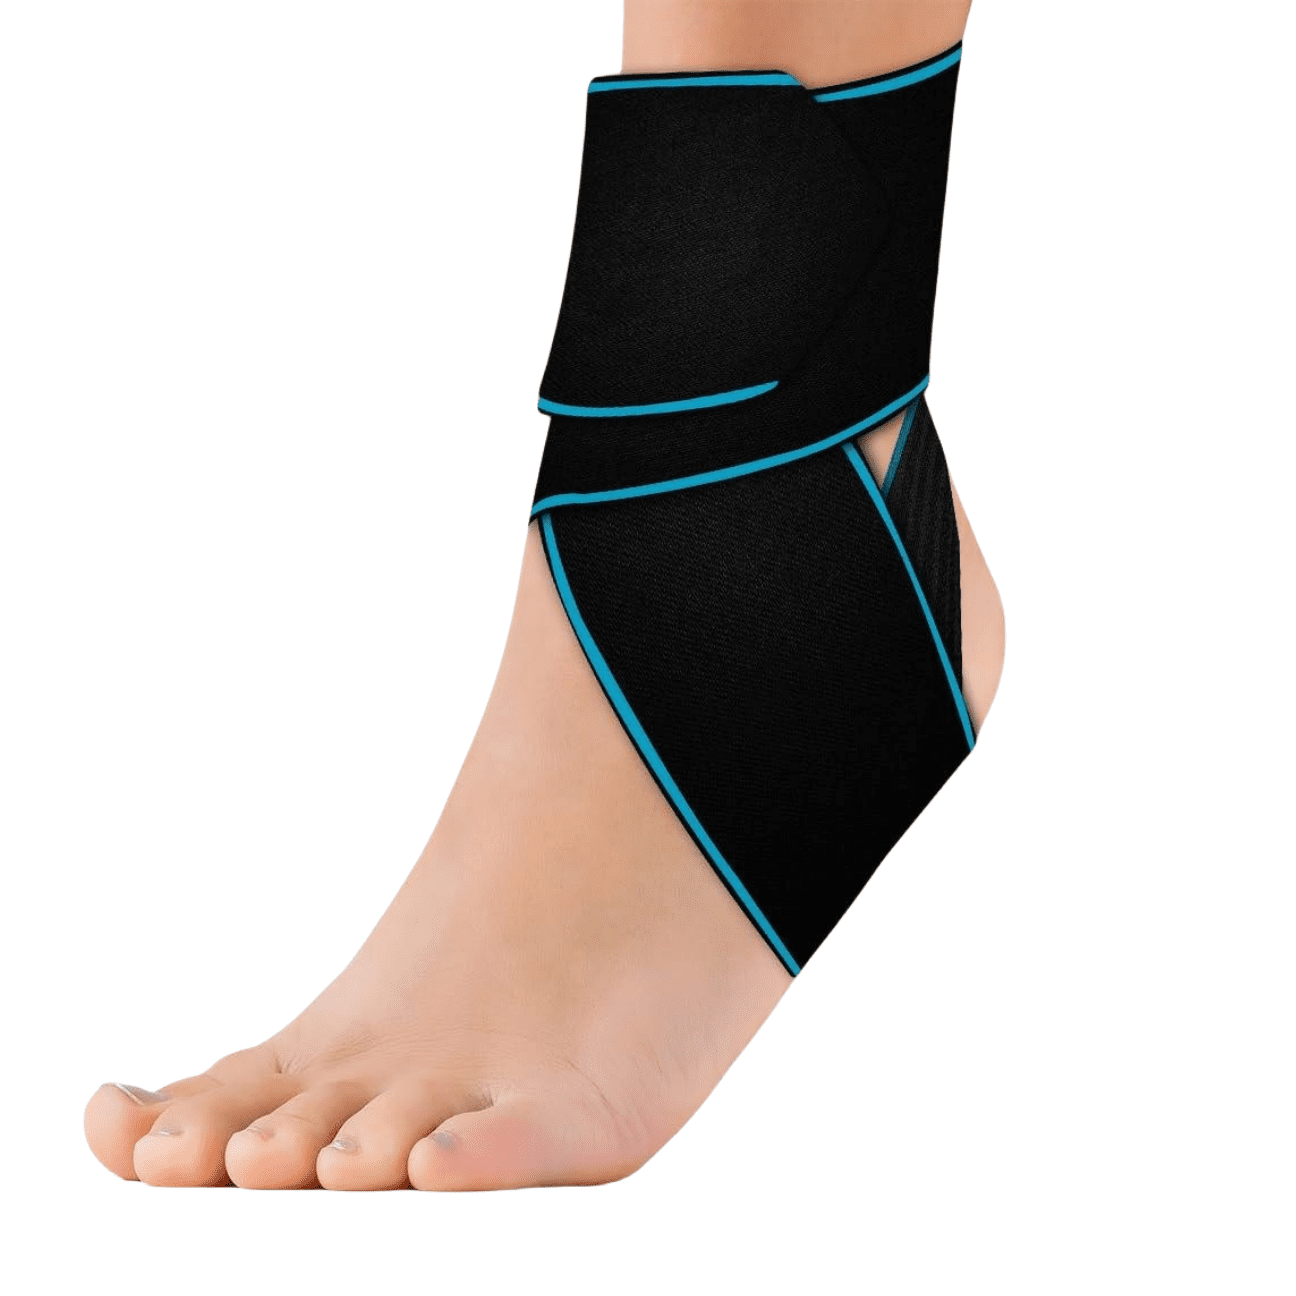 WUSI Ankle Support,Adjustable Ankle Brace Breathable Nylon